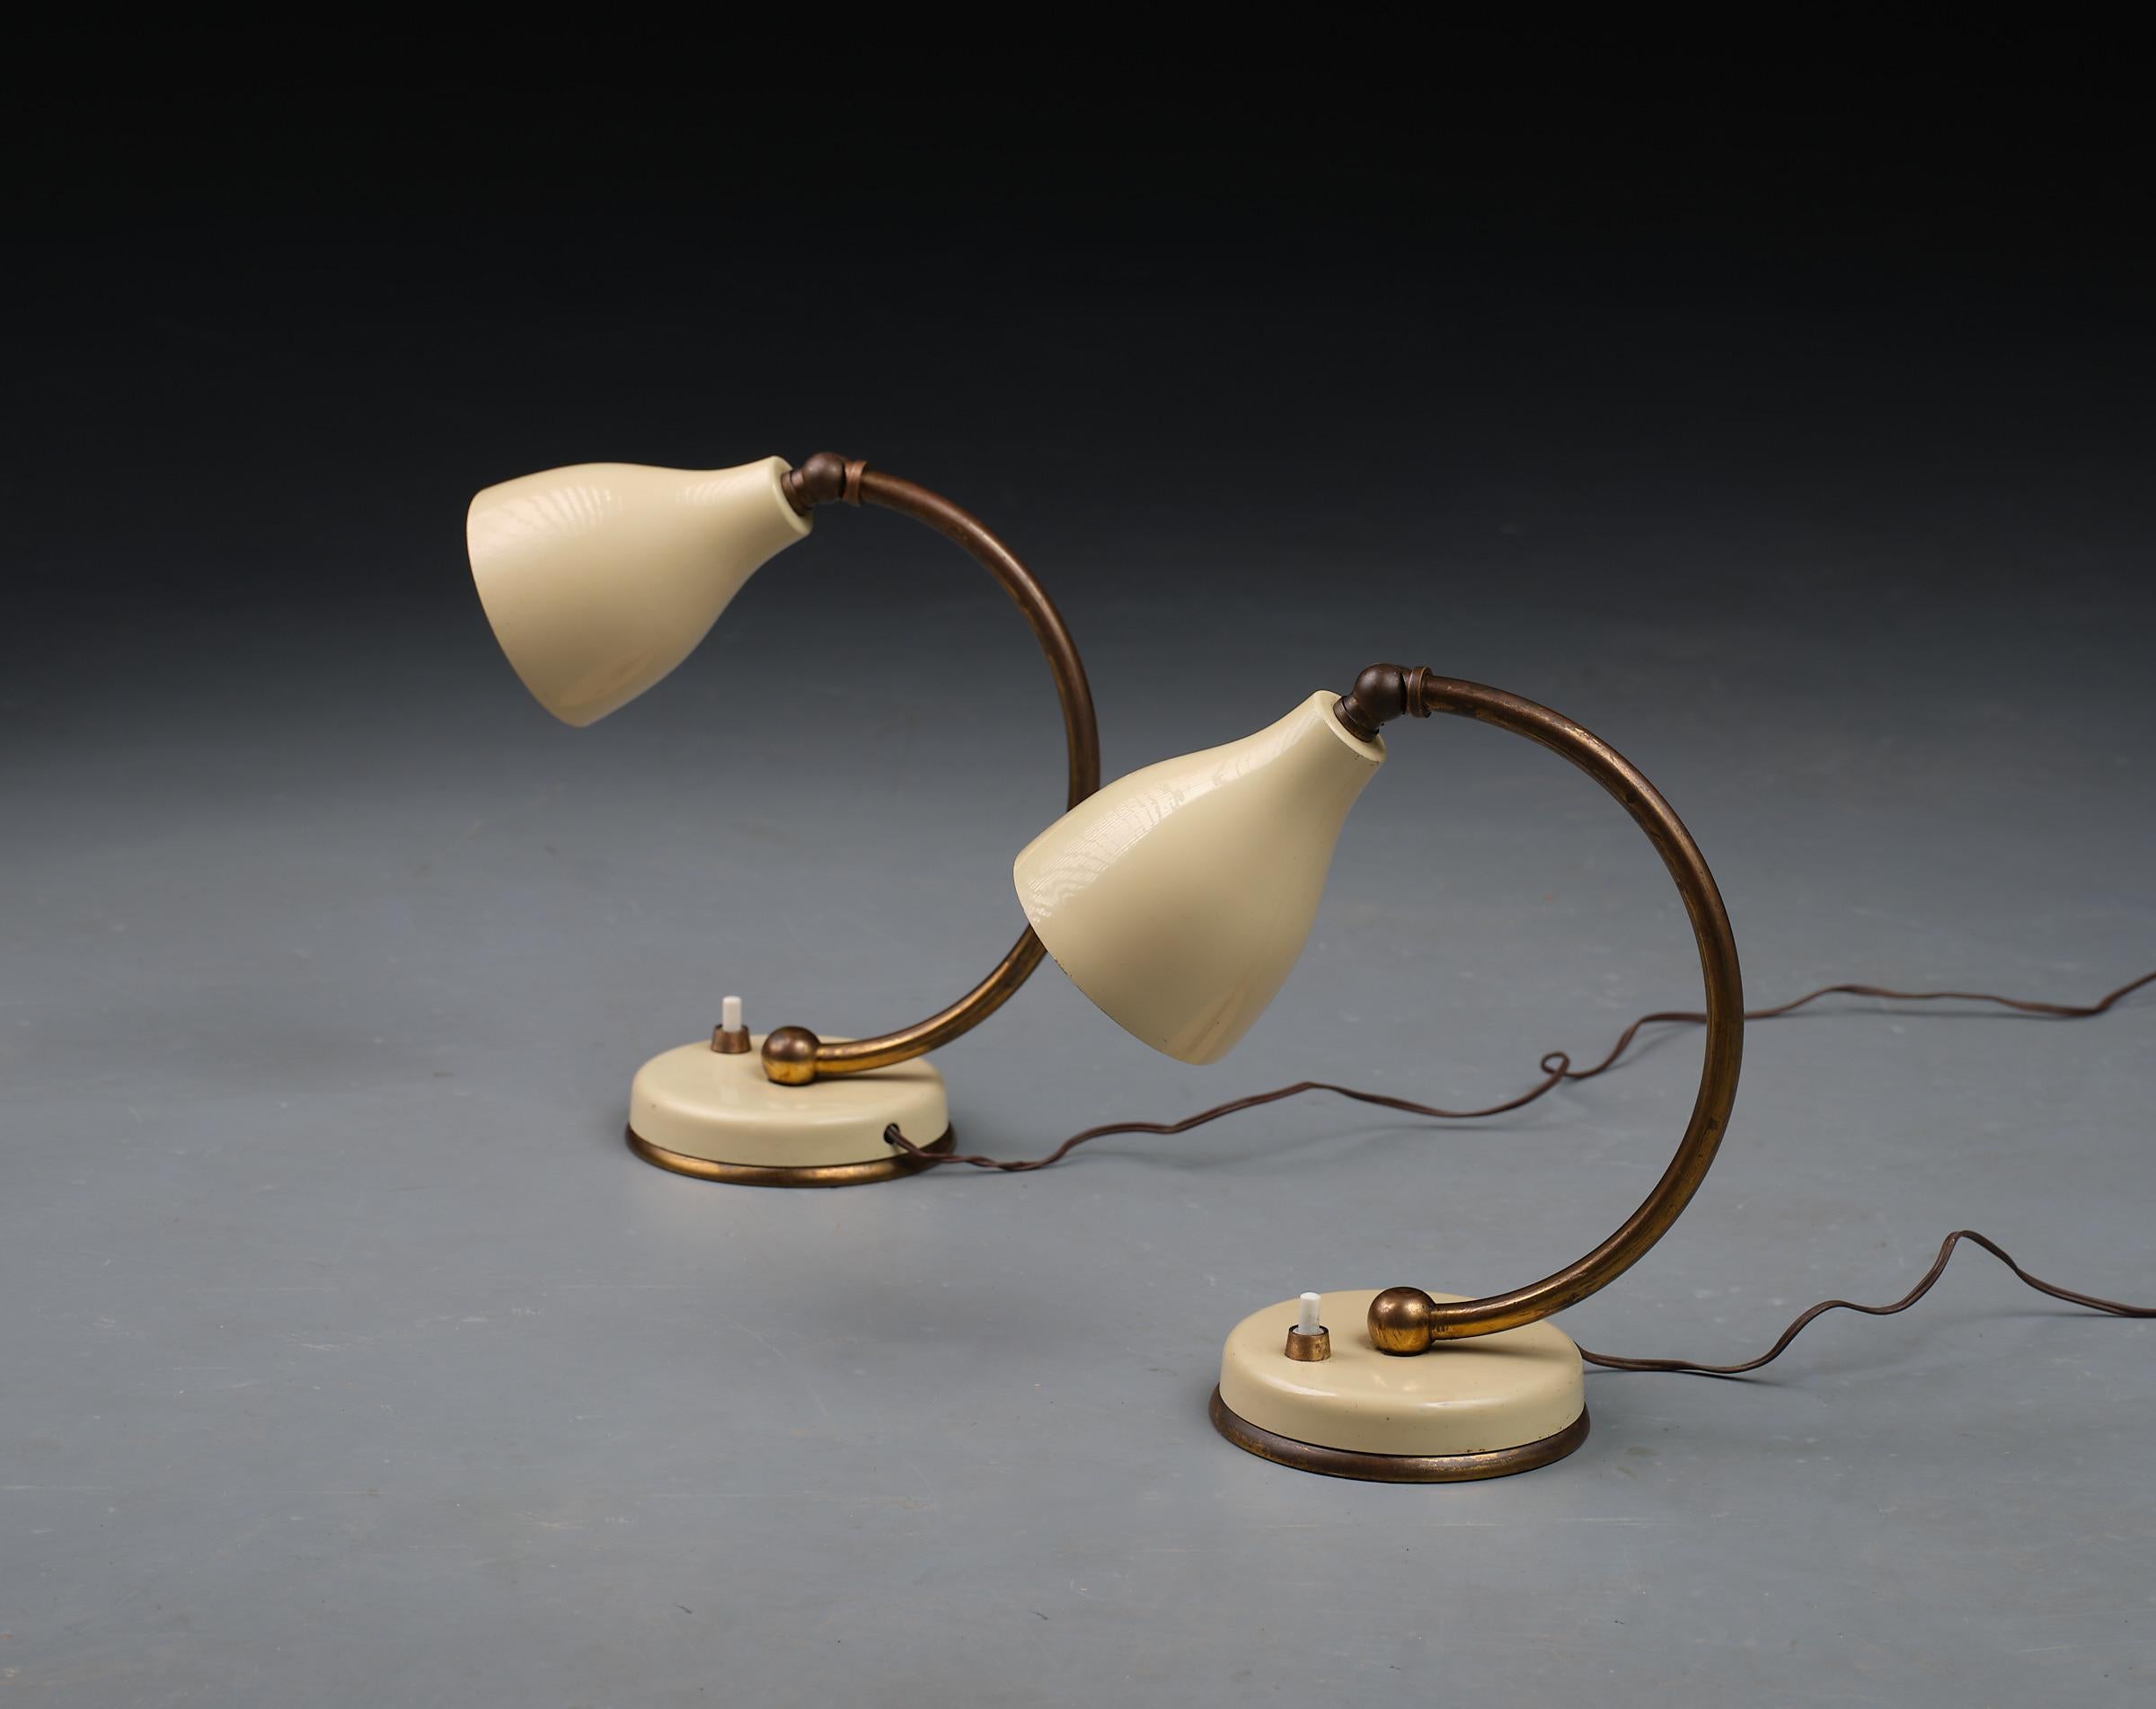 Presenting a pair of gracefully designed Italian table lamps from the 1950s, these pieces blend the elegance of aged brass with the softness of cream-colored lacquered metal. Each lamp showcases a stunning patina that highlights the beauty of its